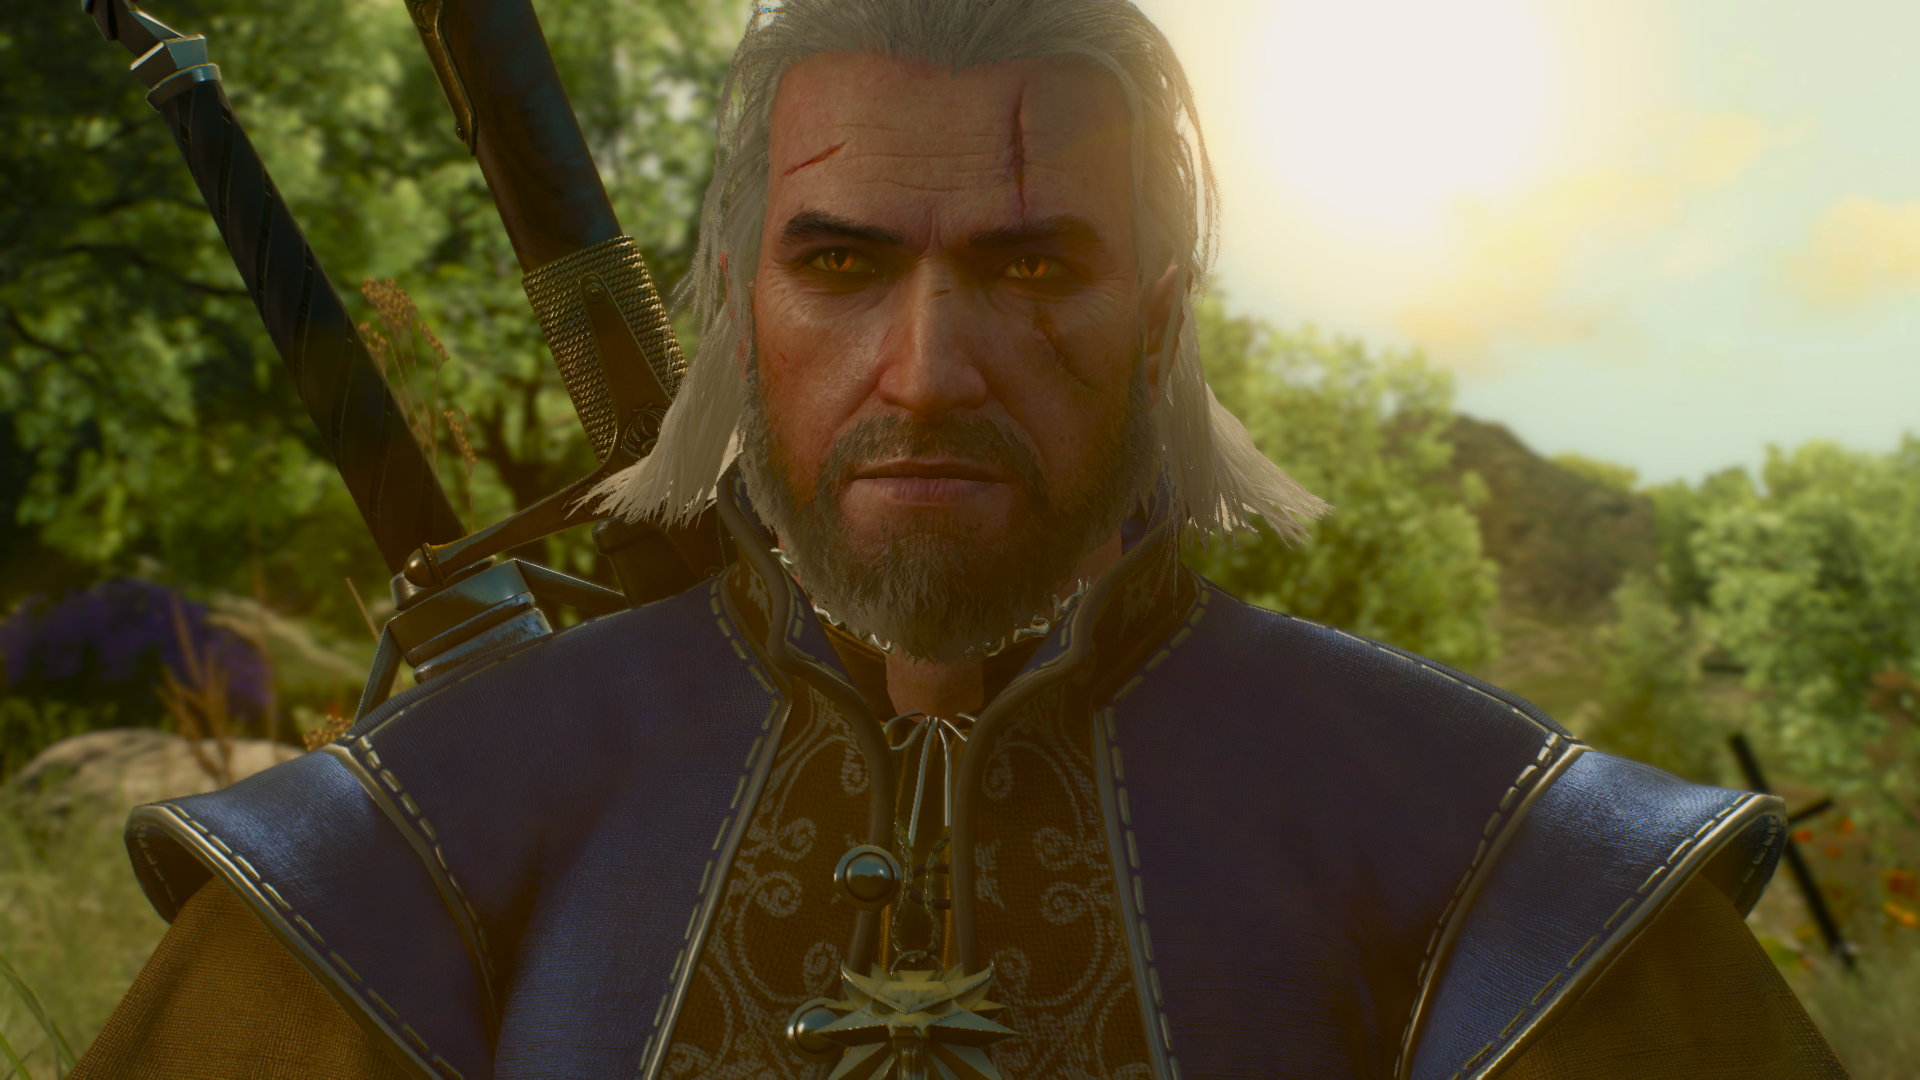 General 1920x1080 The Witcher 3: Wild Hunt video games CD Projekt RED Geralt of Rivia The Witcher screen shot The Witcher 3: Wild Hunt – Hearts of Stone RPG PC gaming video game man Video Game Heroes scars